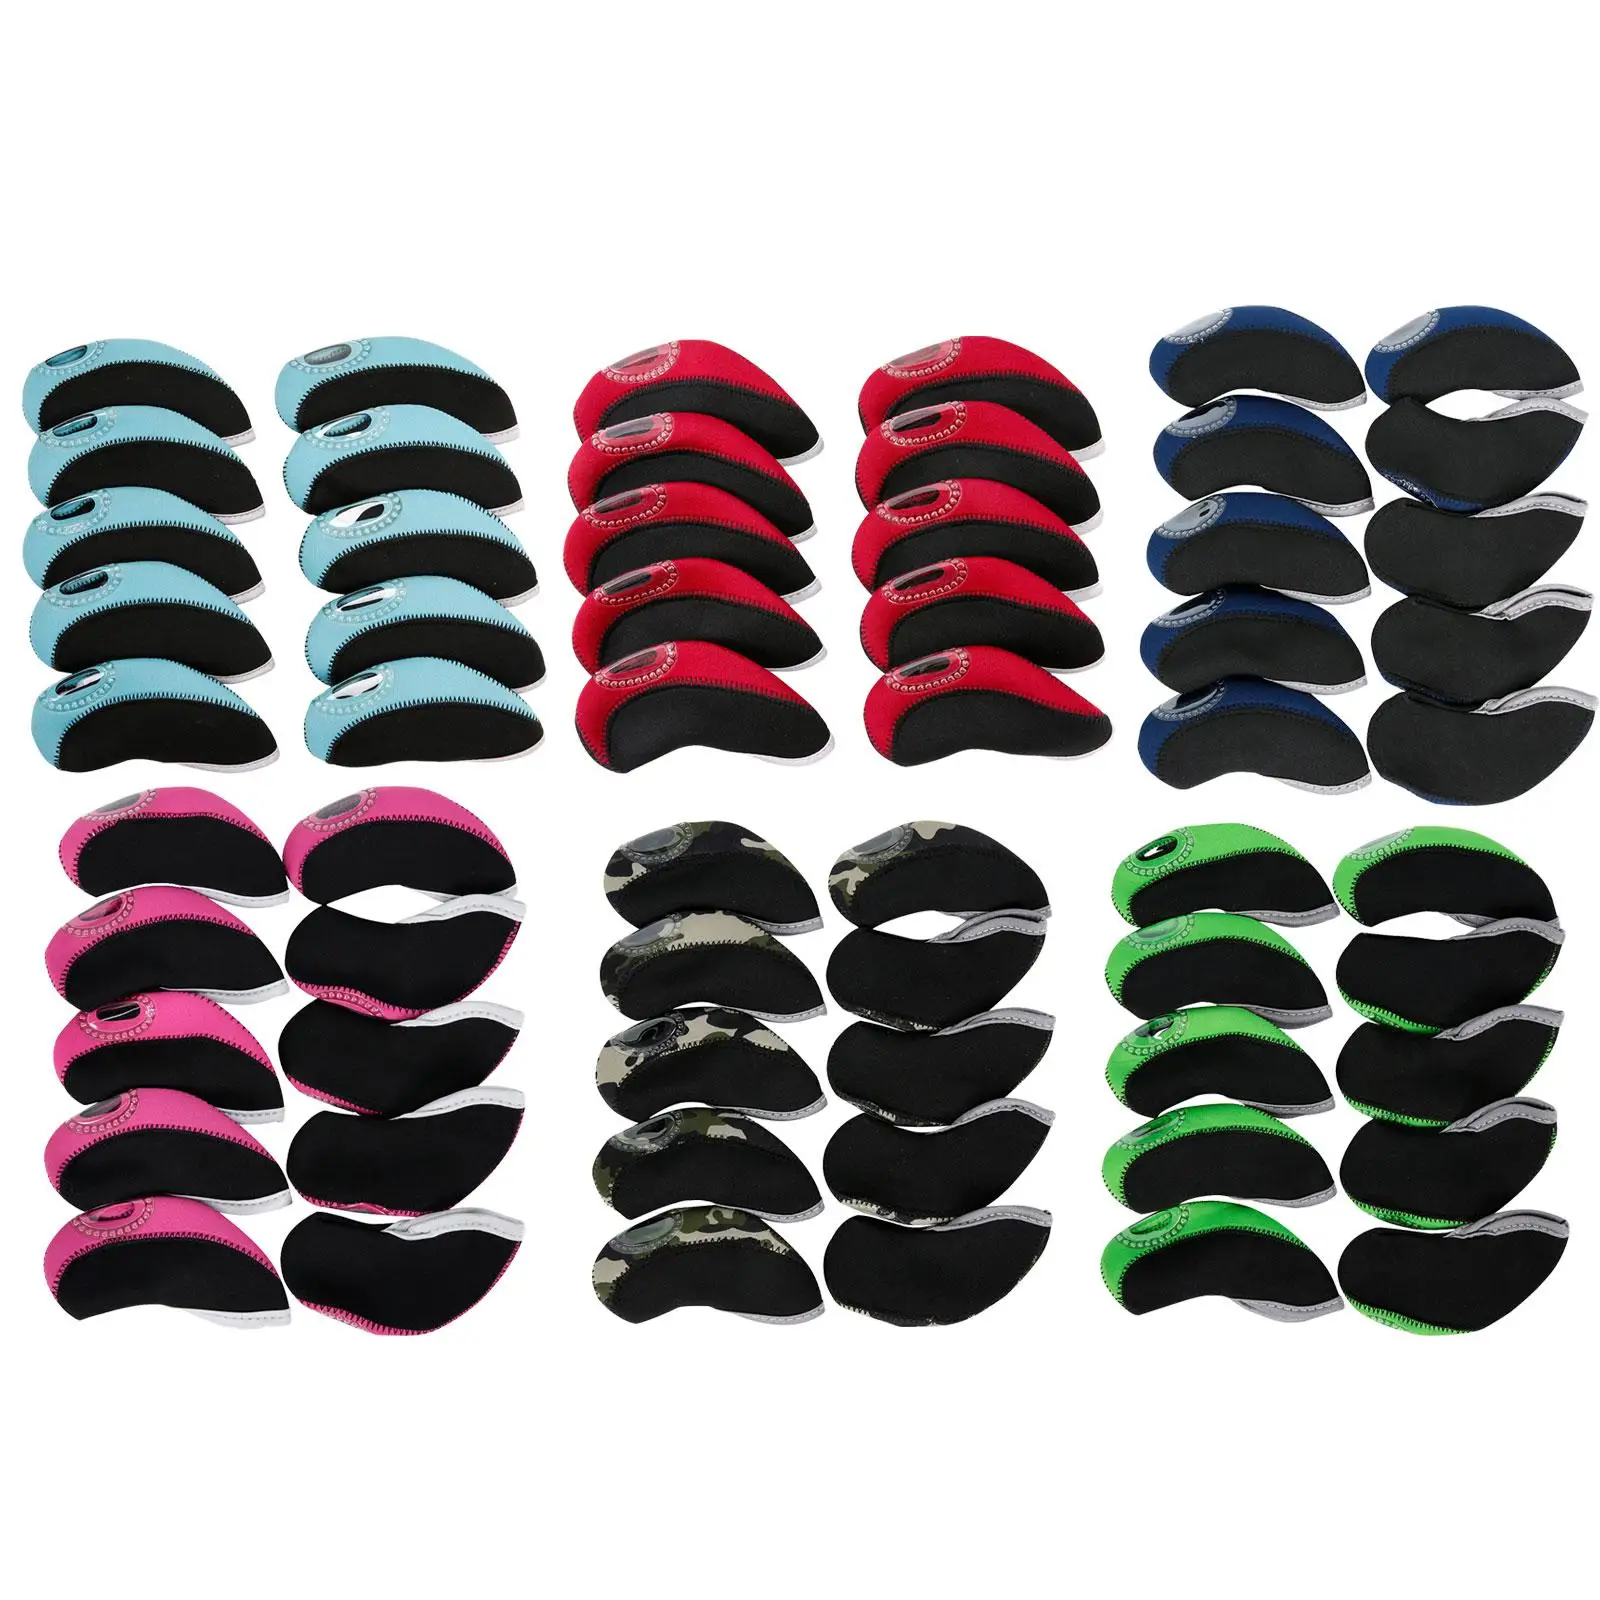 10x Waterproof Golf Iron Headcovers Golf Club Head Cover Fits All Brands Golfer Gift Protector Viewable Window Guard